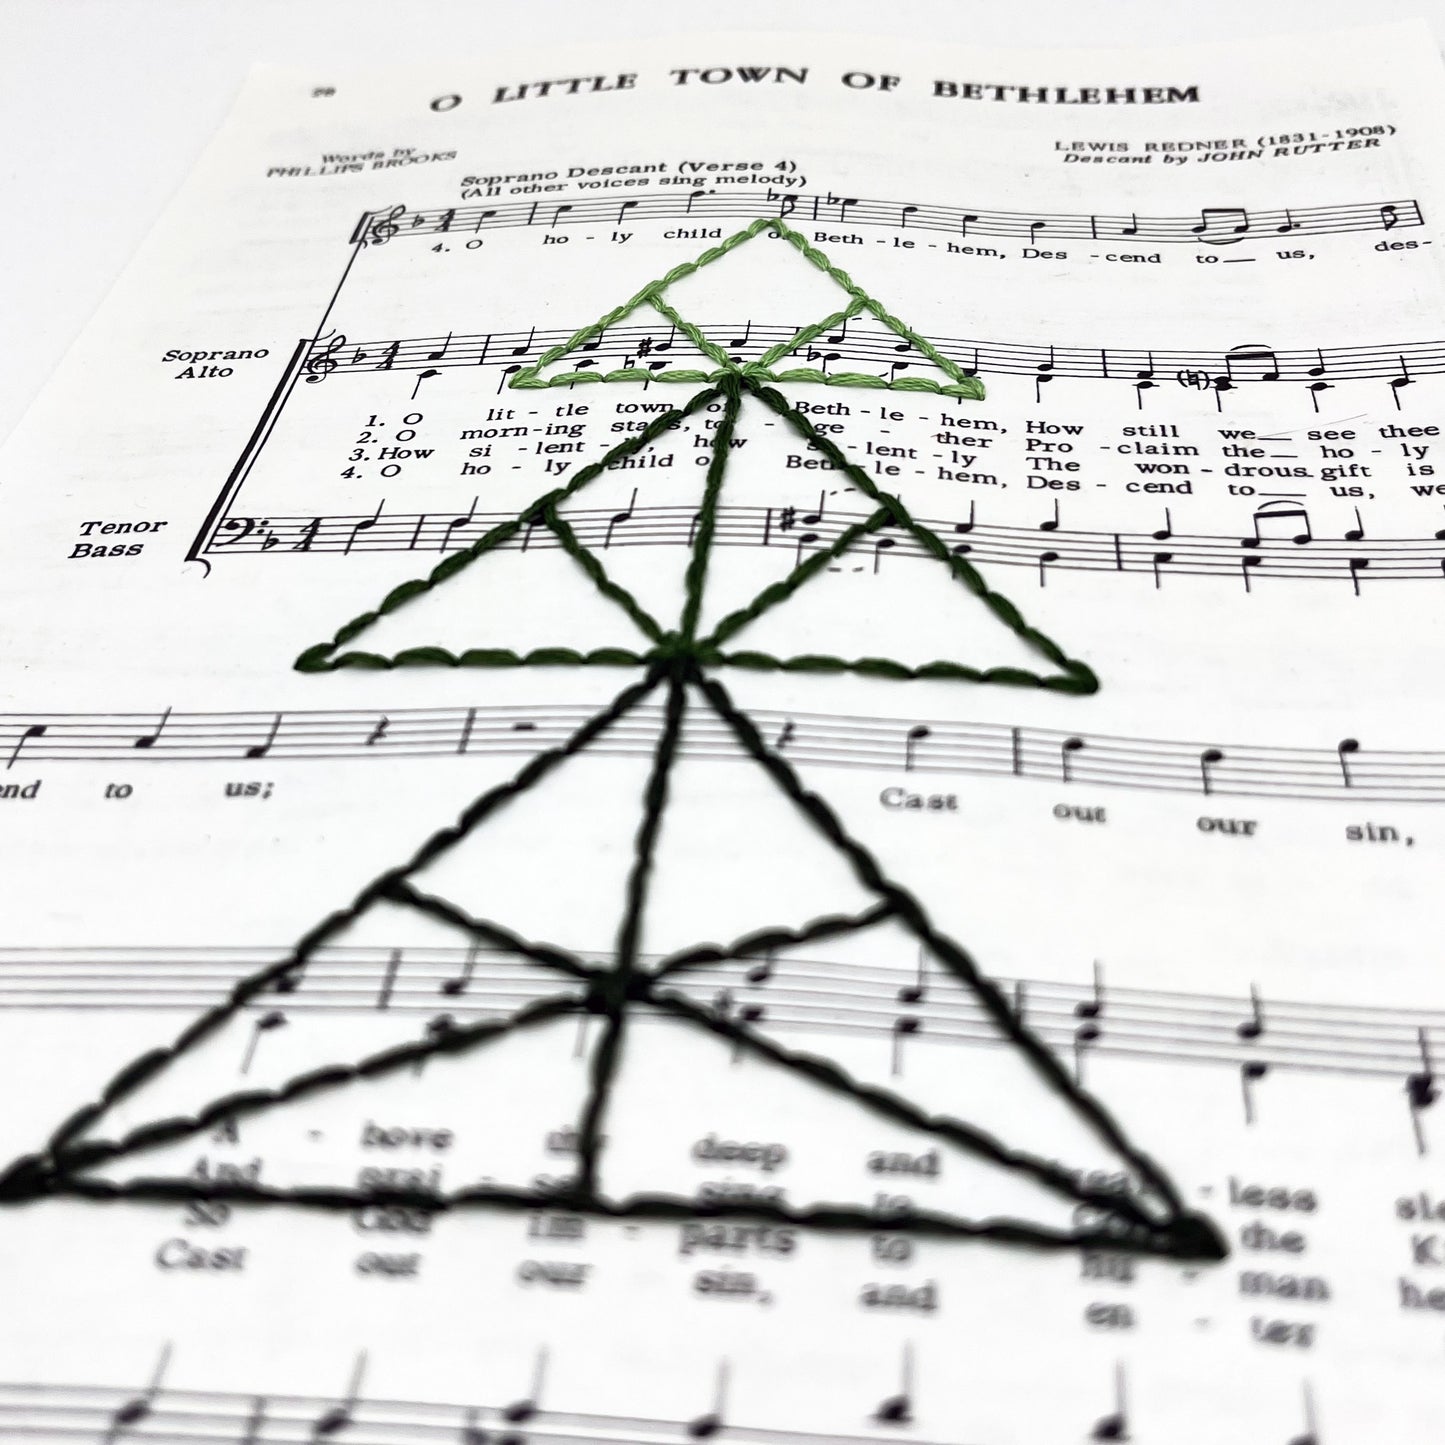 a close up angled view of sheet music from the Christmas "O Little Town of Bethlehem", hand stitched over with a Christmas tree made from triangles, in shades of green thread